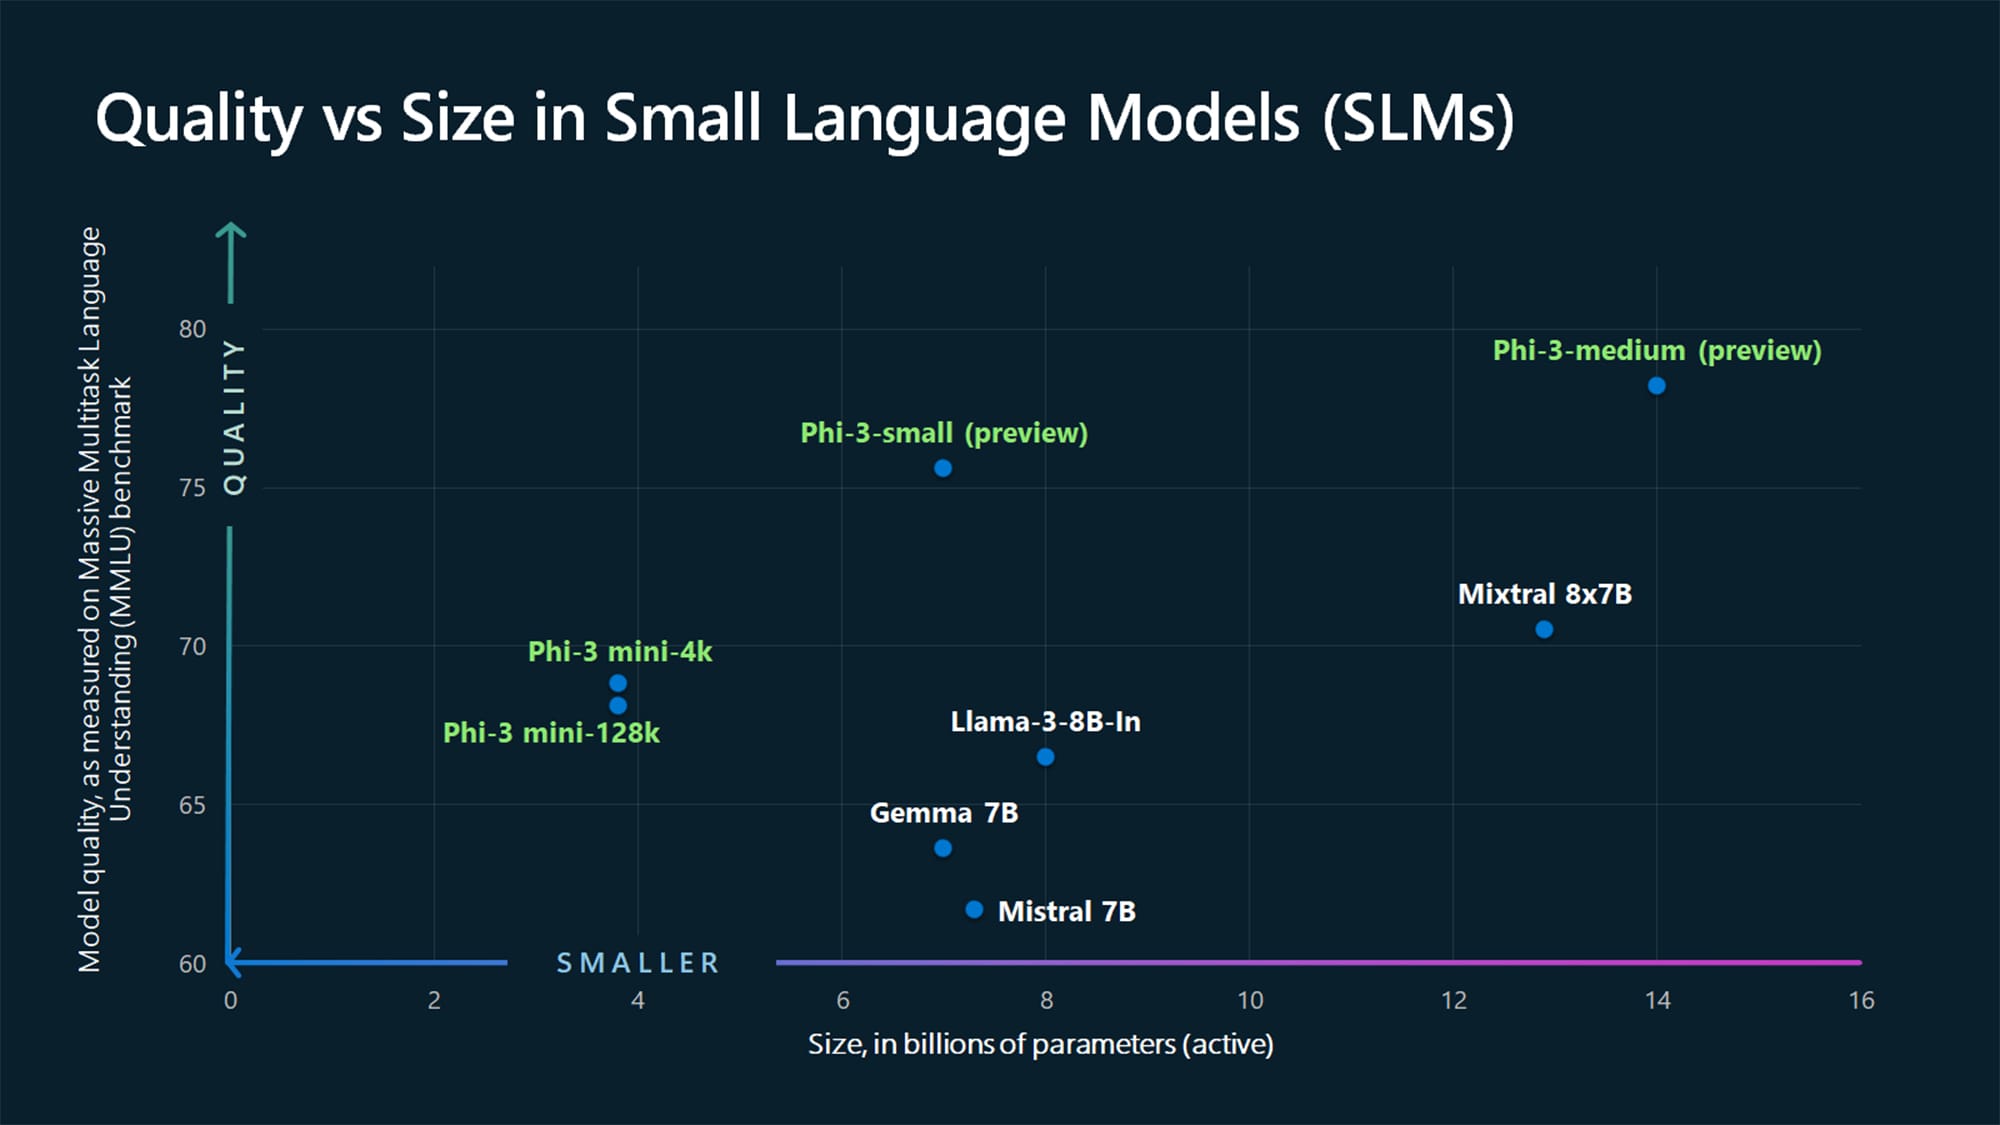 'Tiny but mighty' is how Microsoft describes Phi-3, its new family of small language models